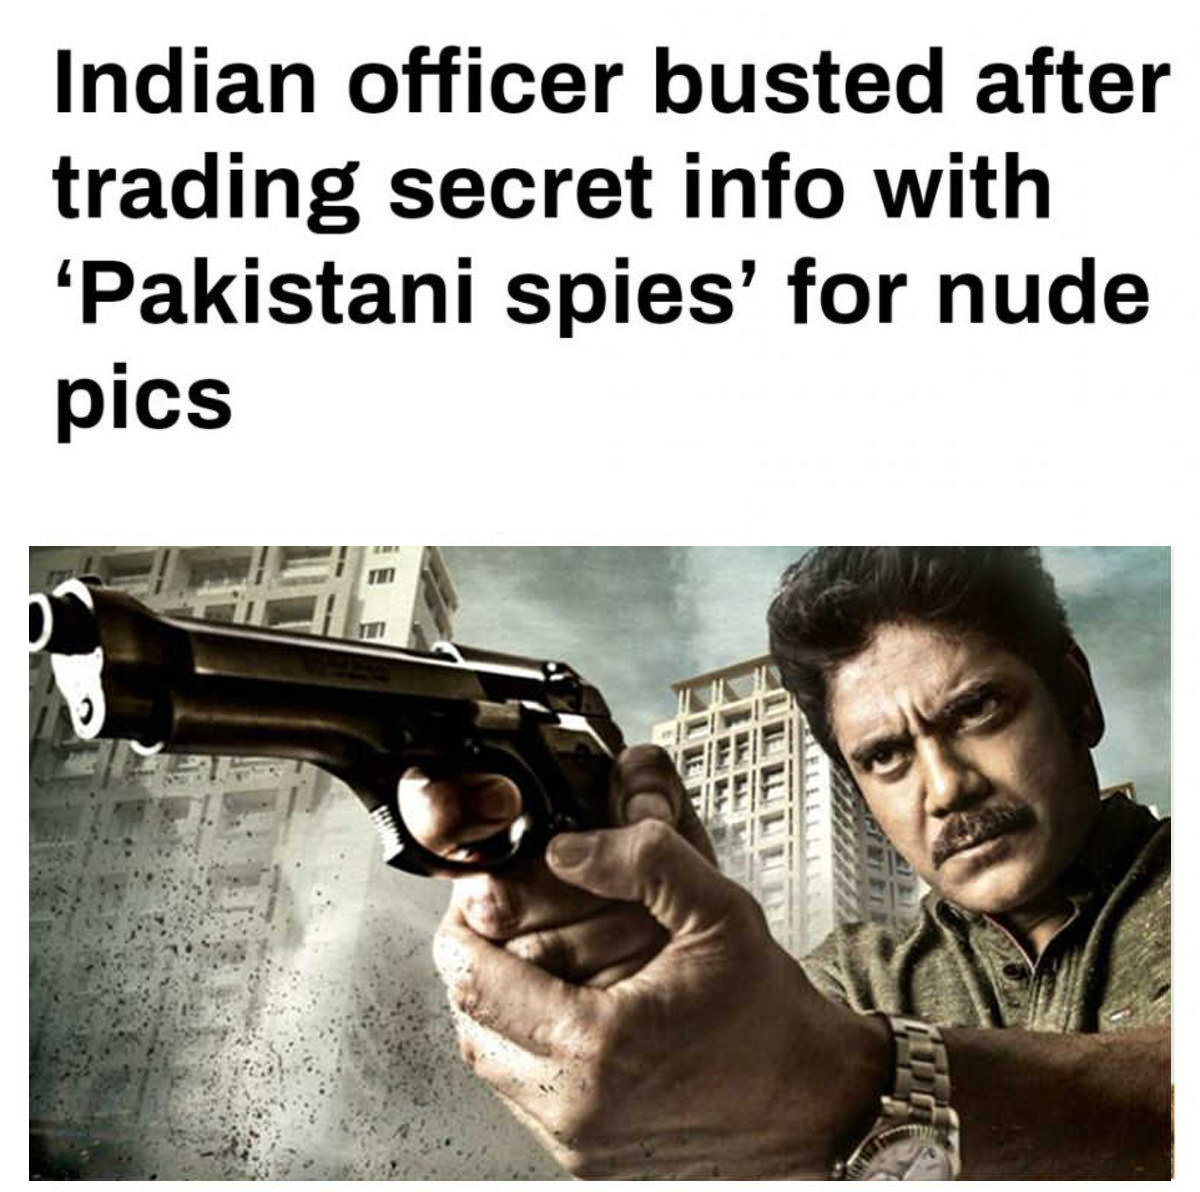 firearm - Indian officer busted after trading secret info with 'Pakistani spies' for nude pics